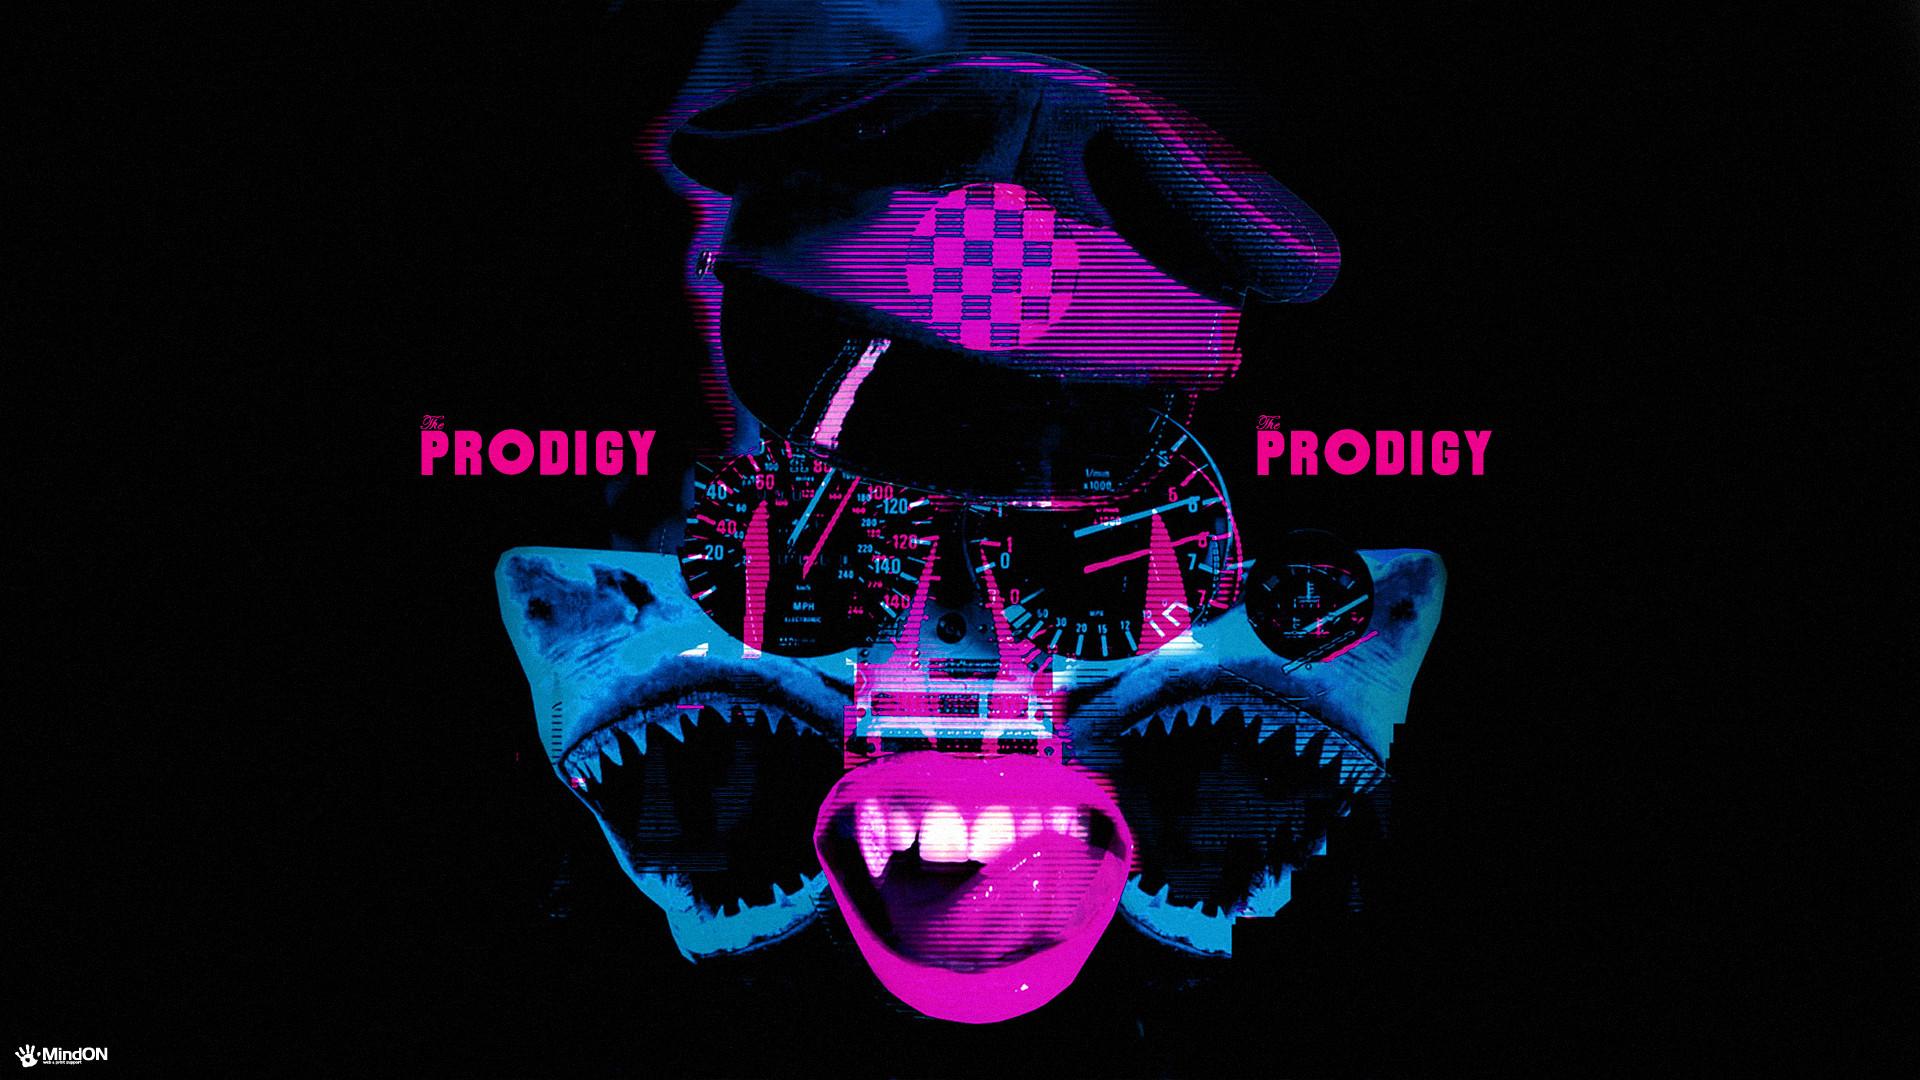 Fan Made The Prodigy Wallpaper